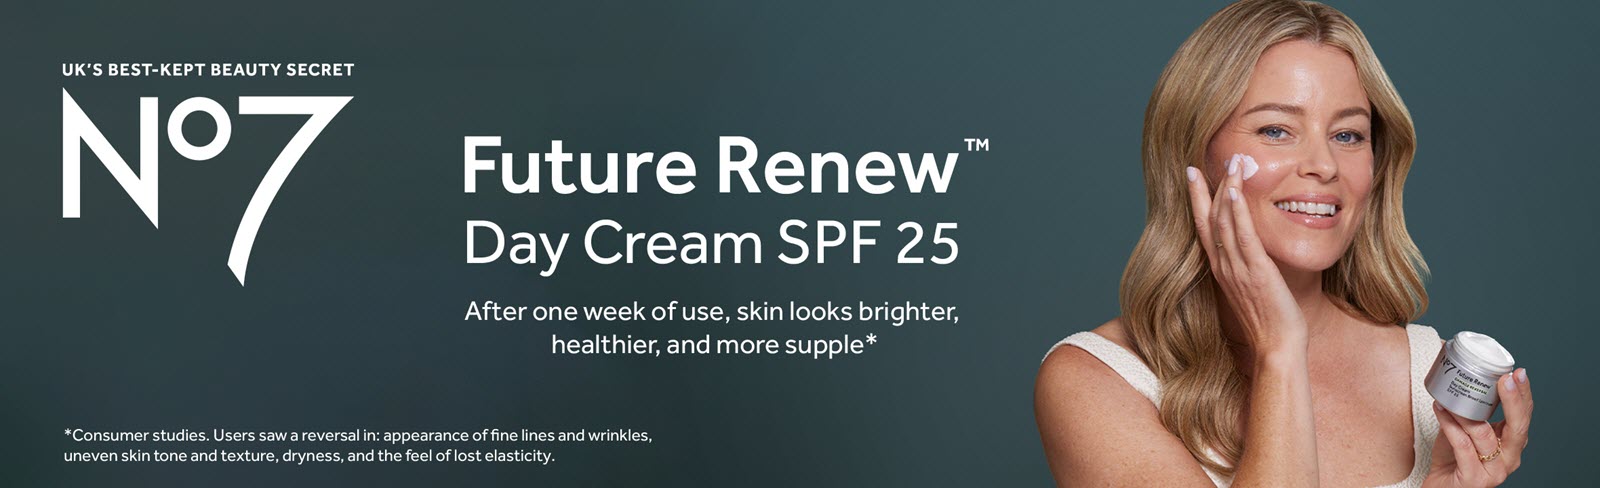 No7 Future Renew(TM) Day Cream SPF 25. After 1 week of use, skin looks brighter, healthier, & more supple.* *Consumer studies. Users saw a reversal in: appearance of fine lines & wrinkles, uneven skin tone & texture, dryness, & the feel of lost elasticity